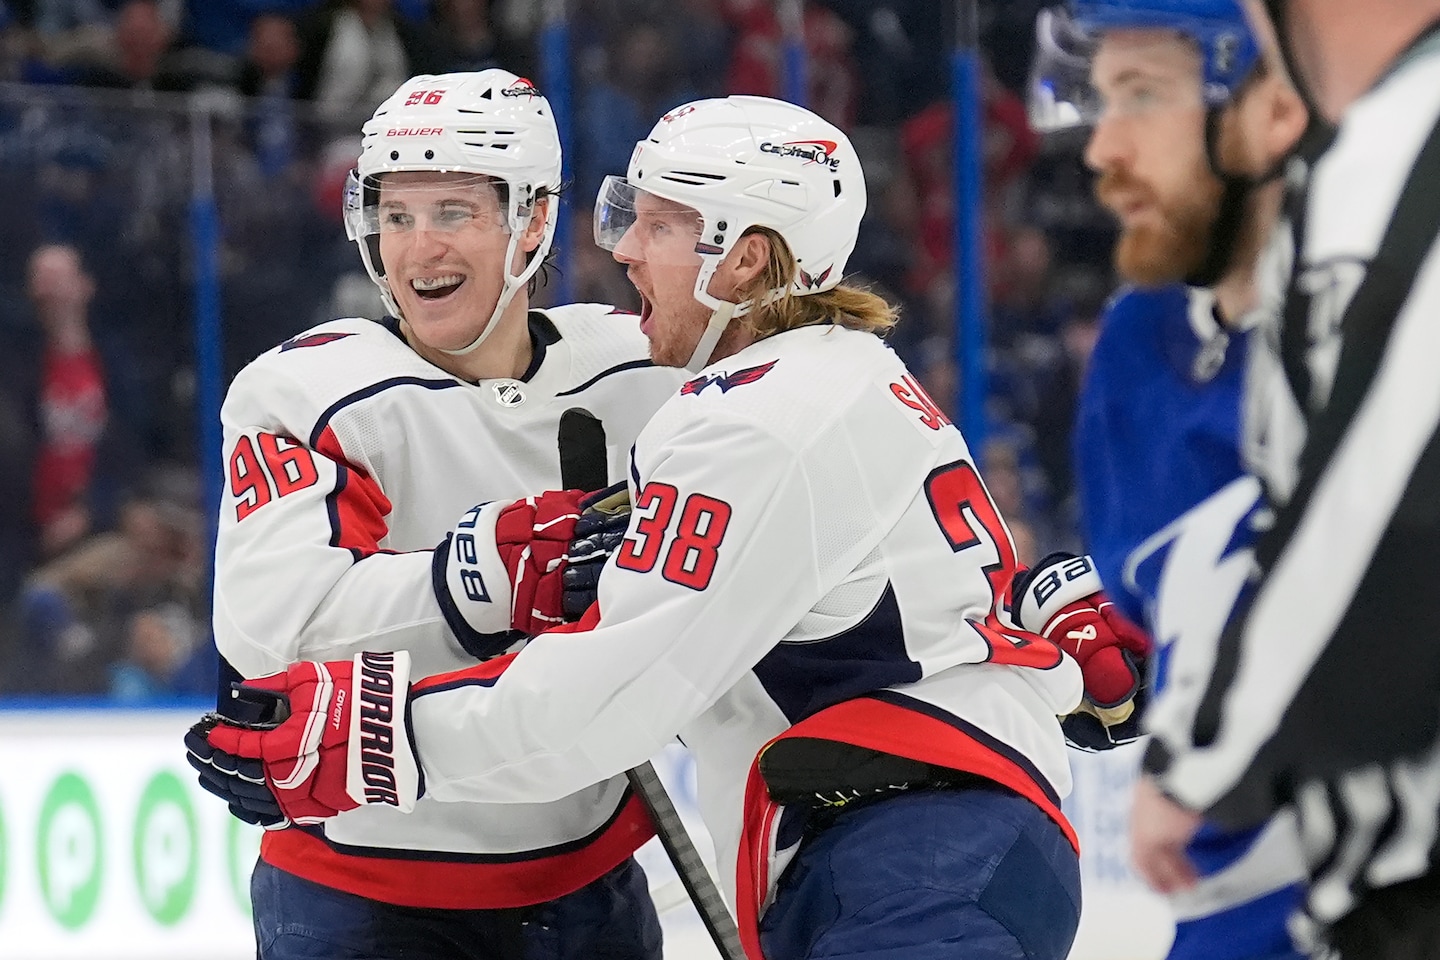 Capitals keep their composure, beat Lightning for third straight win